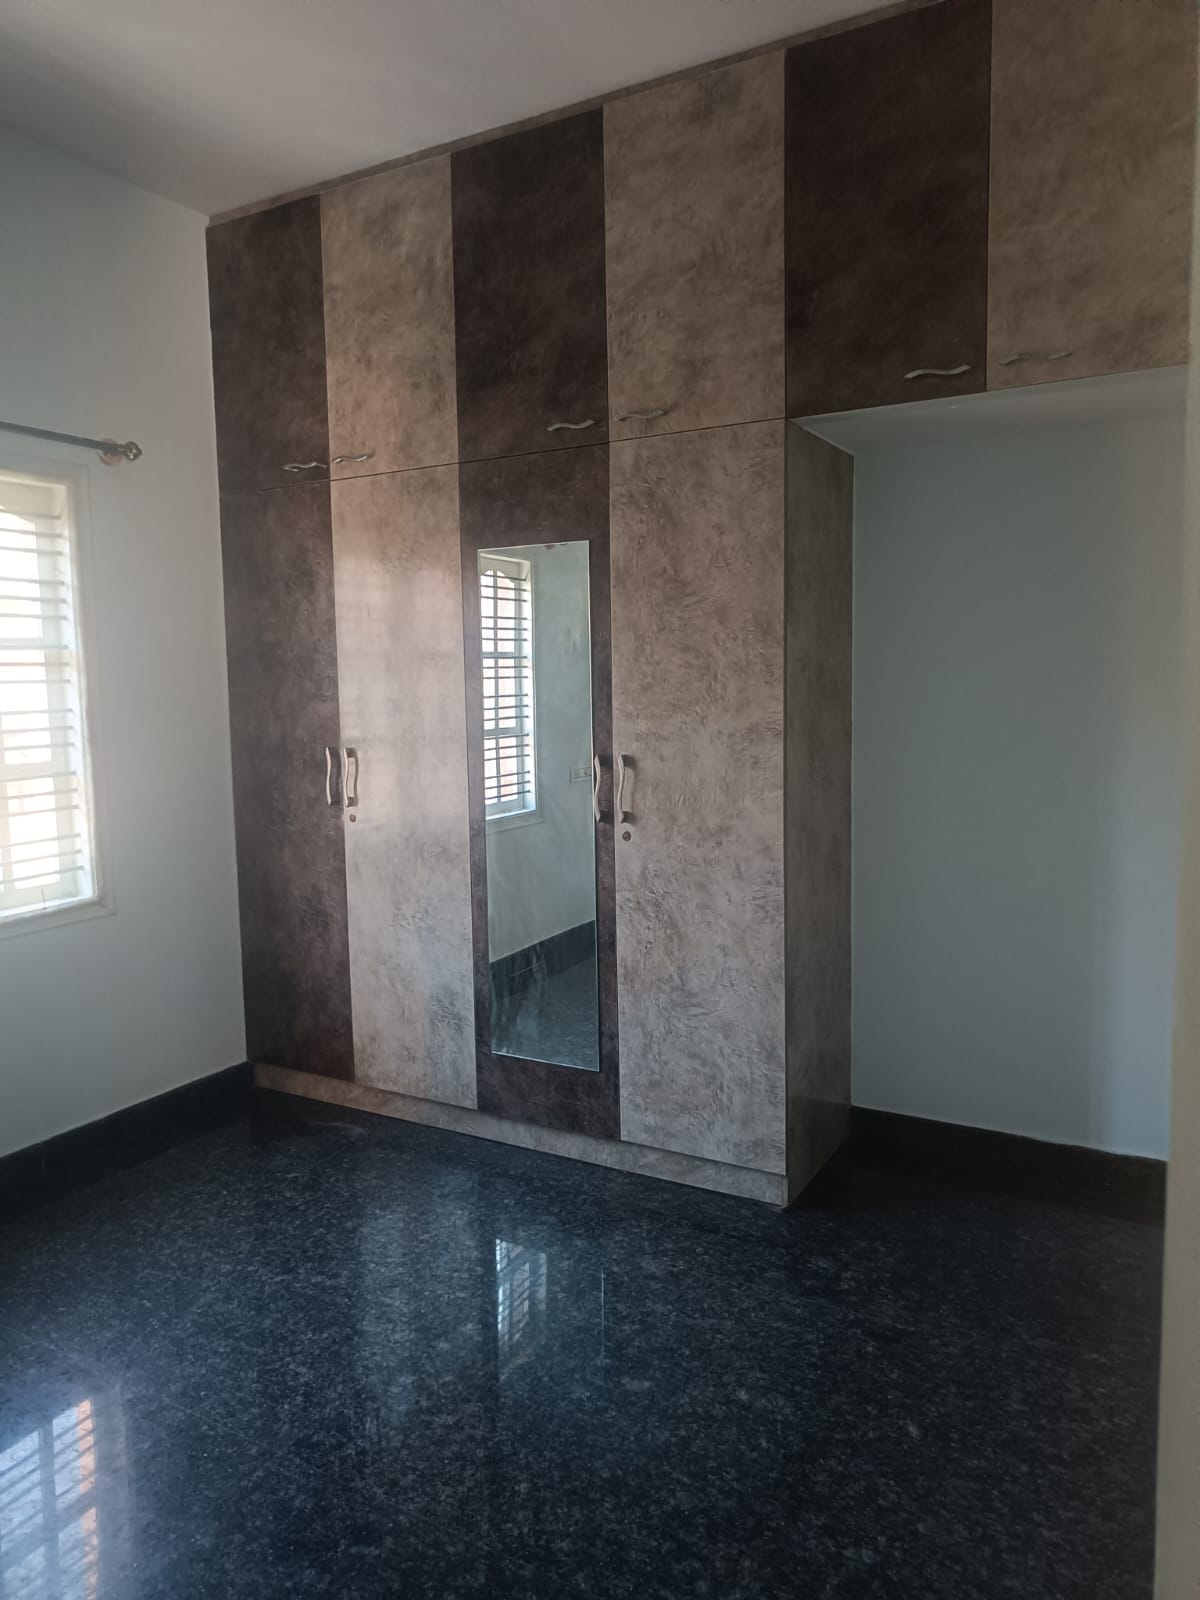 1 BHK Independent House for Lease Only at JAML2 - 2534 in Carmelaram